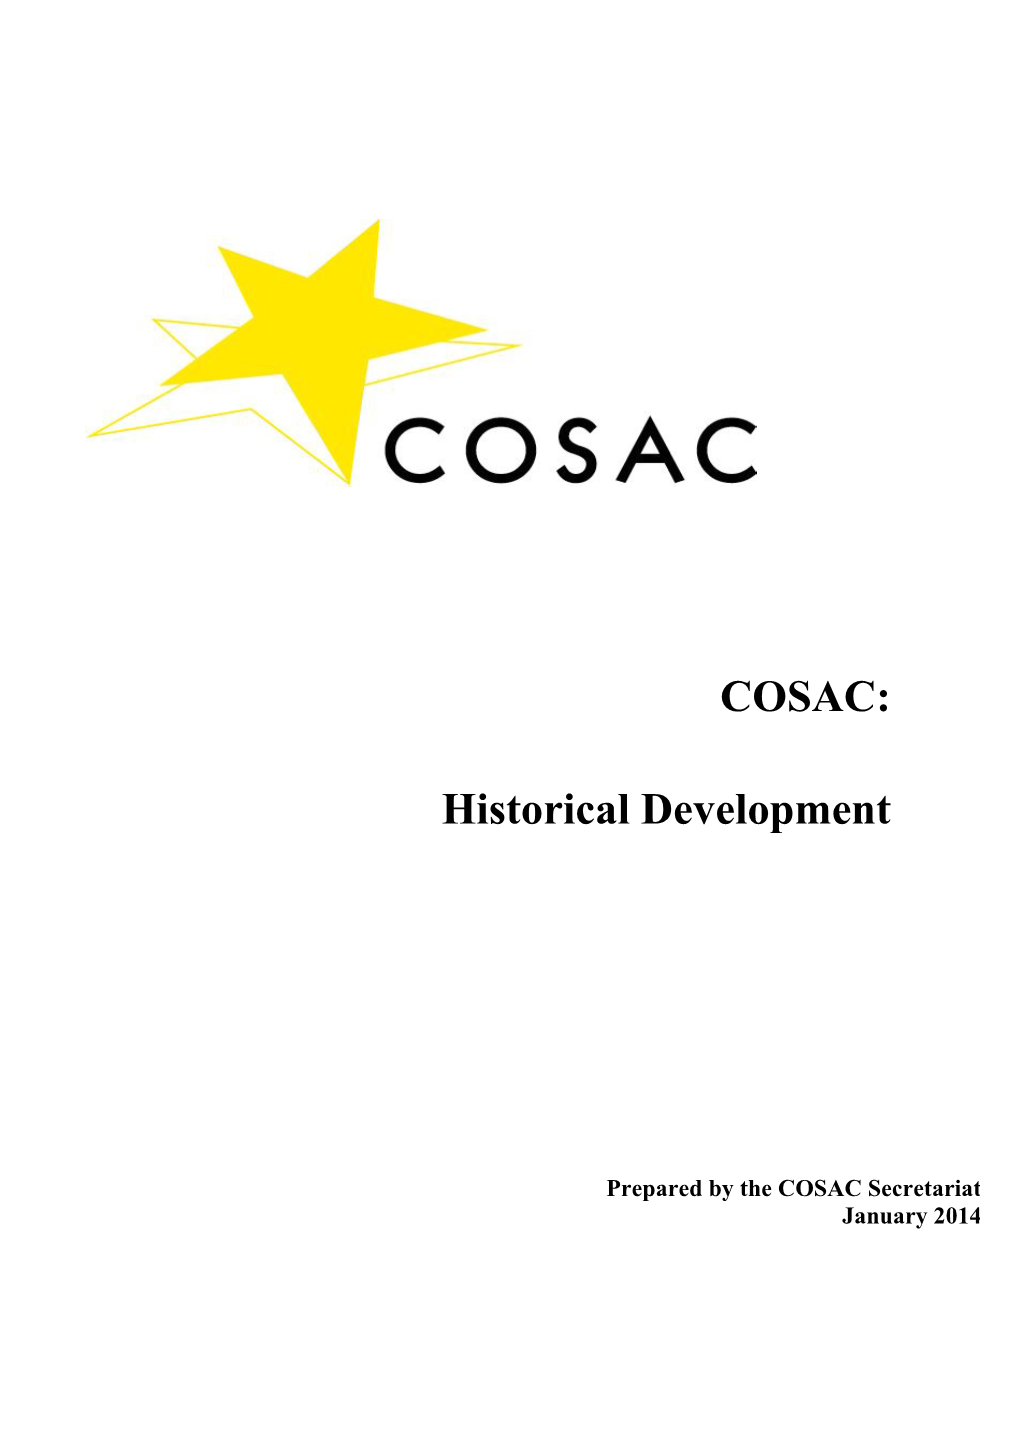 History of COSAC, a Specific Piece of EU Draft Legislation Was Examined by National Parliaments Within COSAC